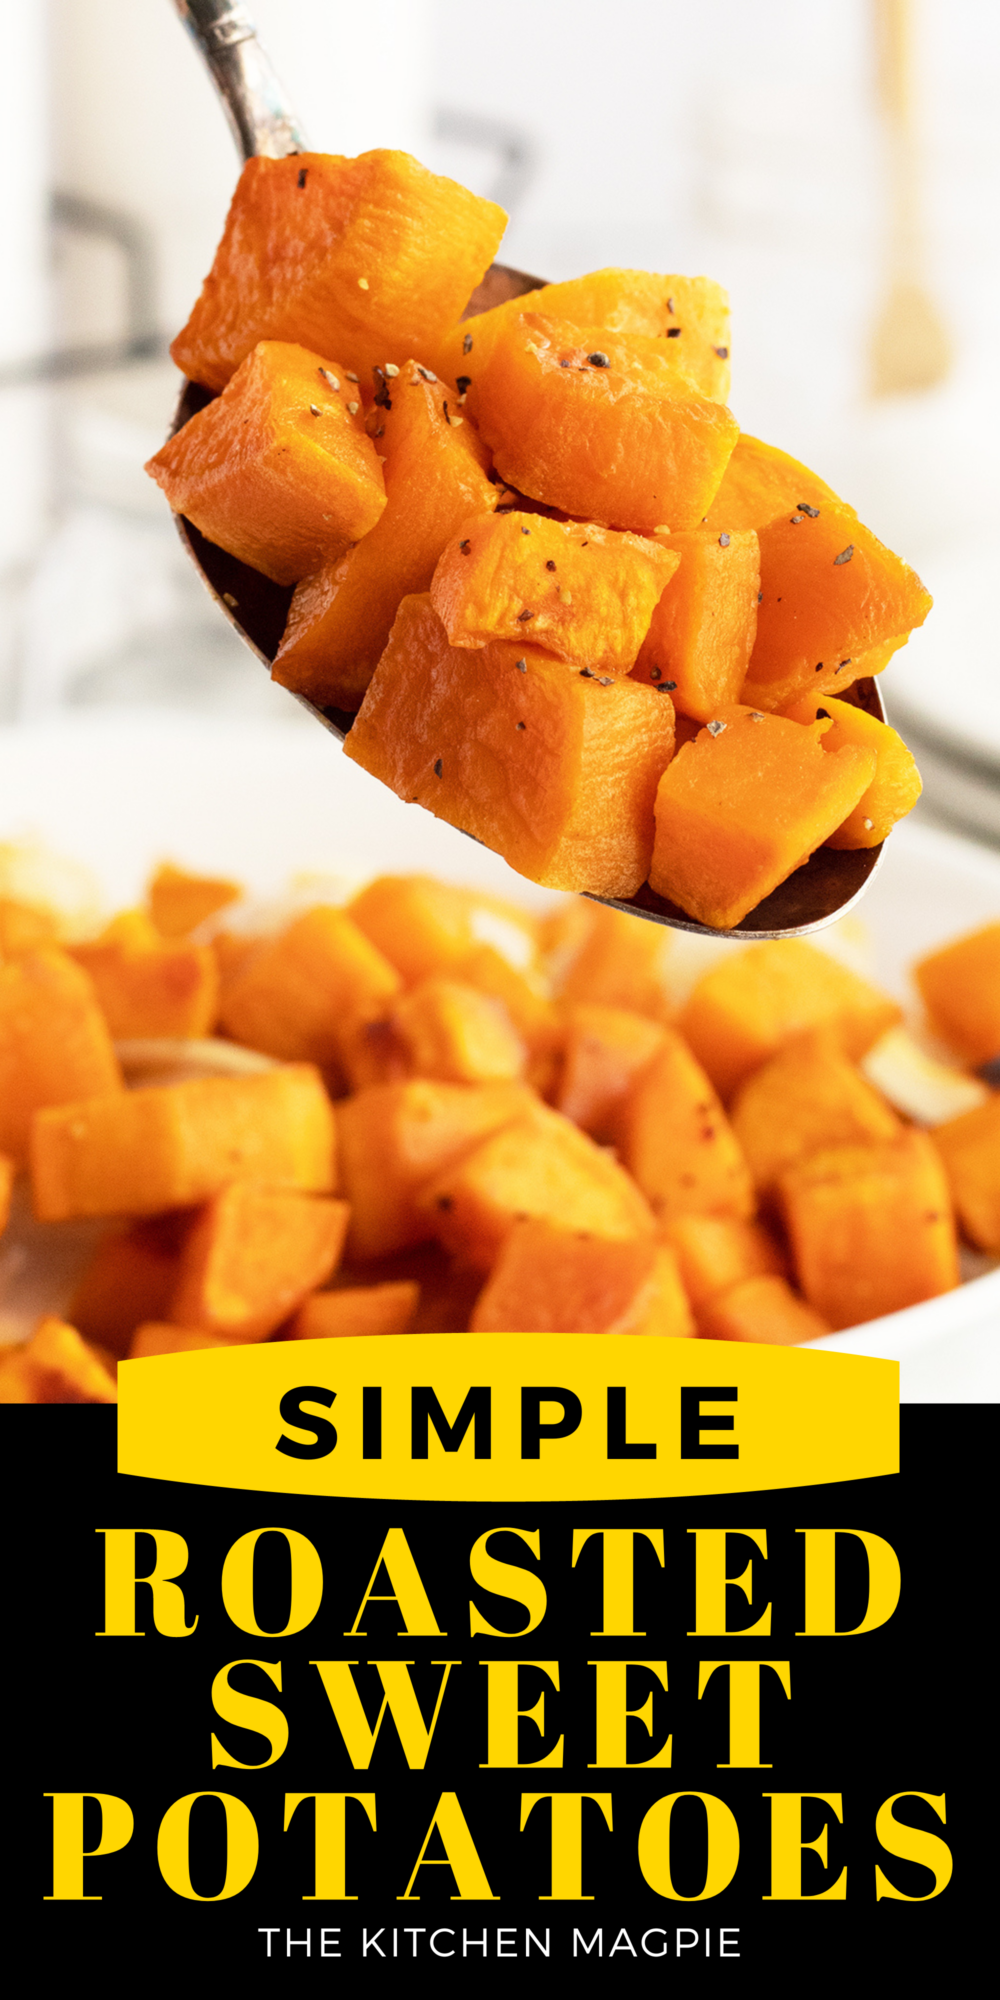 This simple, filling, and nutritious recipe for roasted sweet potatoes will easily become your new favorite side dish!